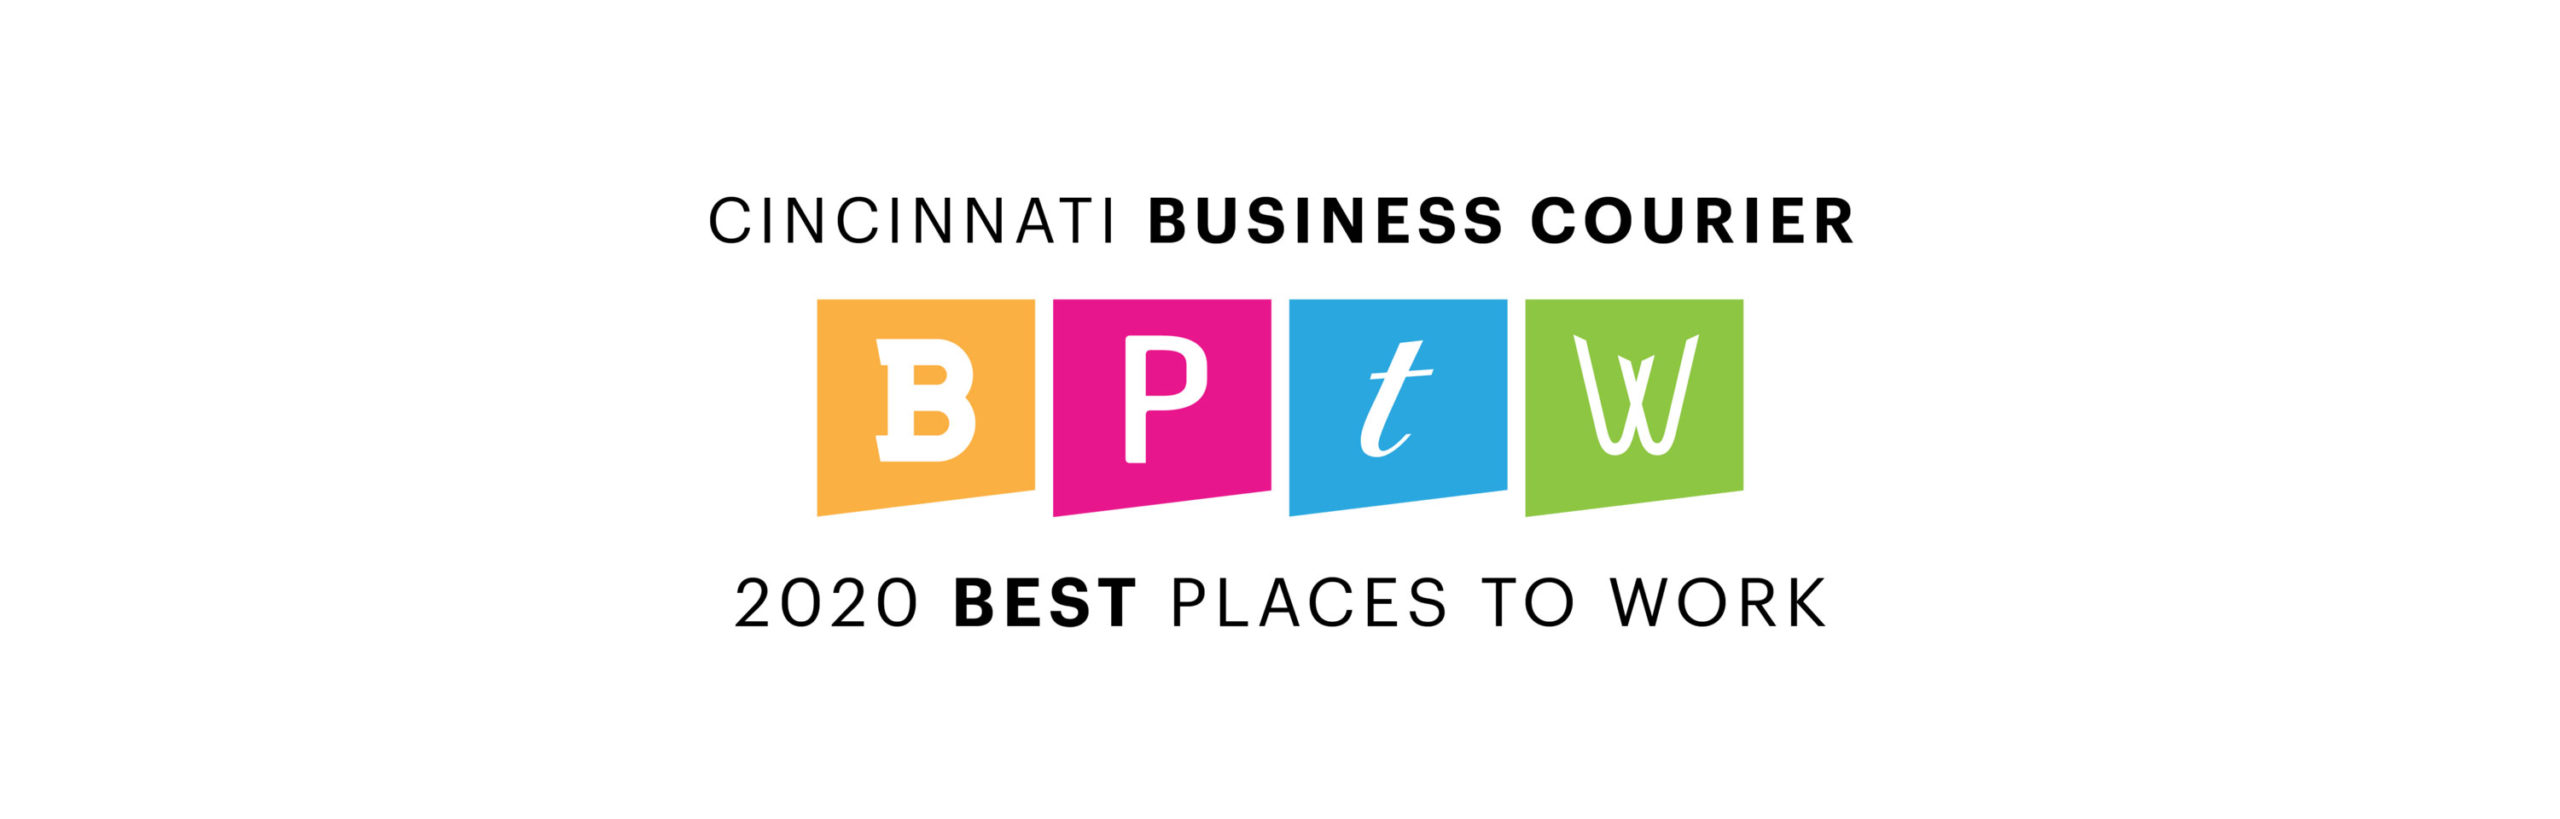 CBJ-BestPlaces2Work2020_logo_png-1920x700-1-scaled